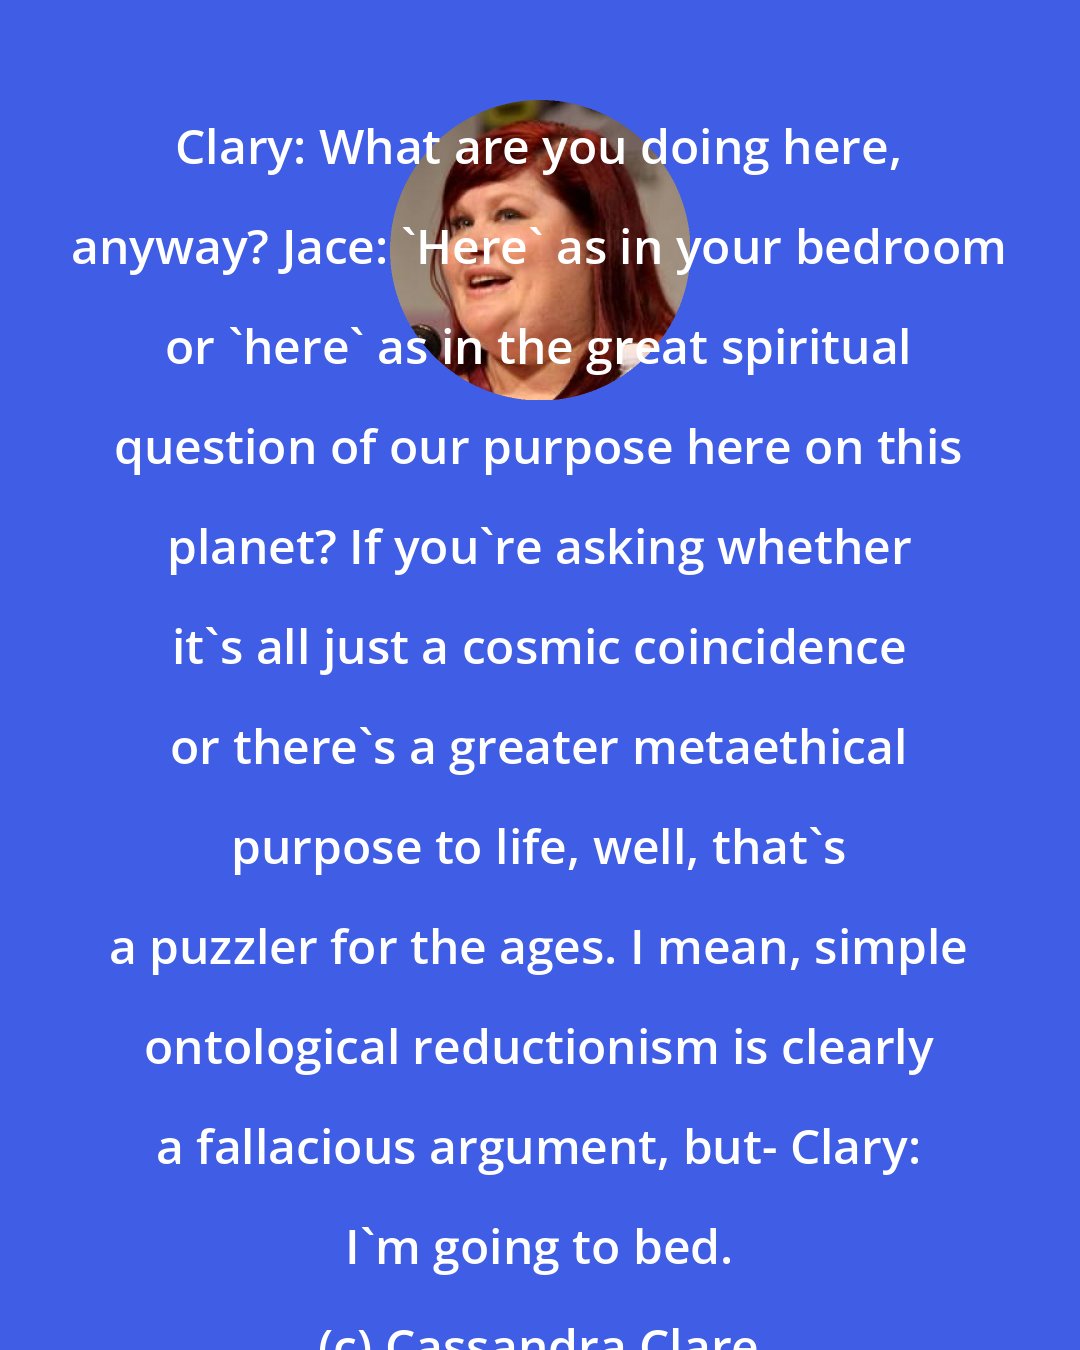 Cassandra Clare: Clary: What are you doing here, anyway? Jace: 'Here' as in your bedroom or 'here' as in the great spiritual question of our purpose here on this planet? If you're asking whether it's all just a cosmic coincidence or there's a greater metaethical purpose to life, well, that's a puzzler for the ages. I mean, simple ontological reductionism is clearly a fallacious argument, but- Clary: I'm going to bed.